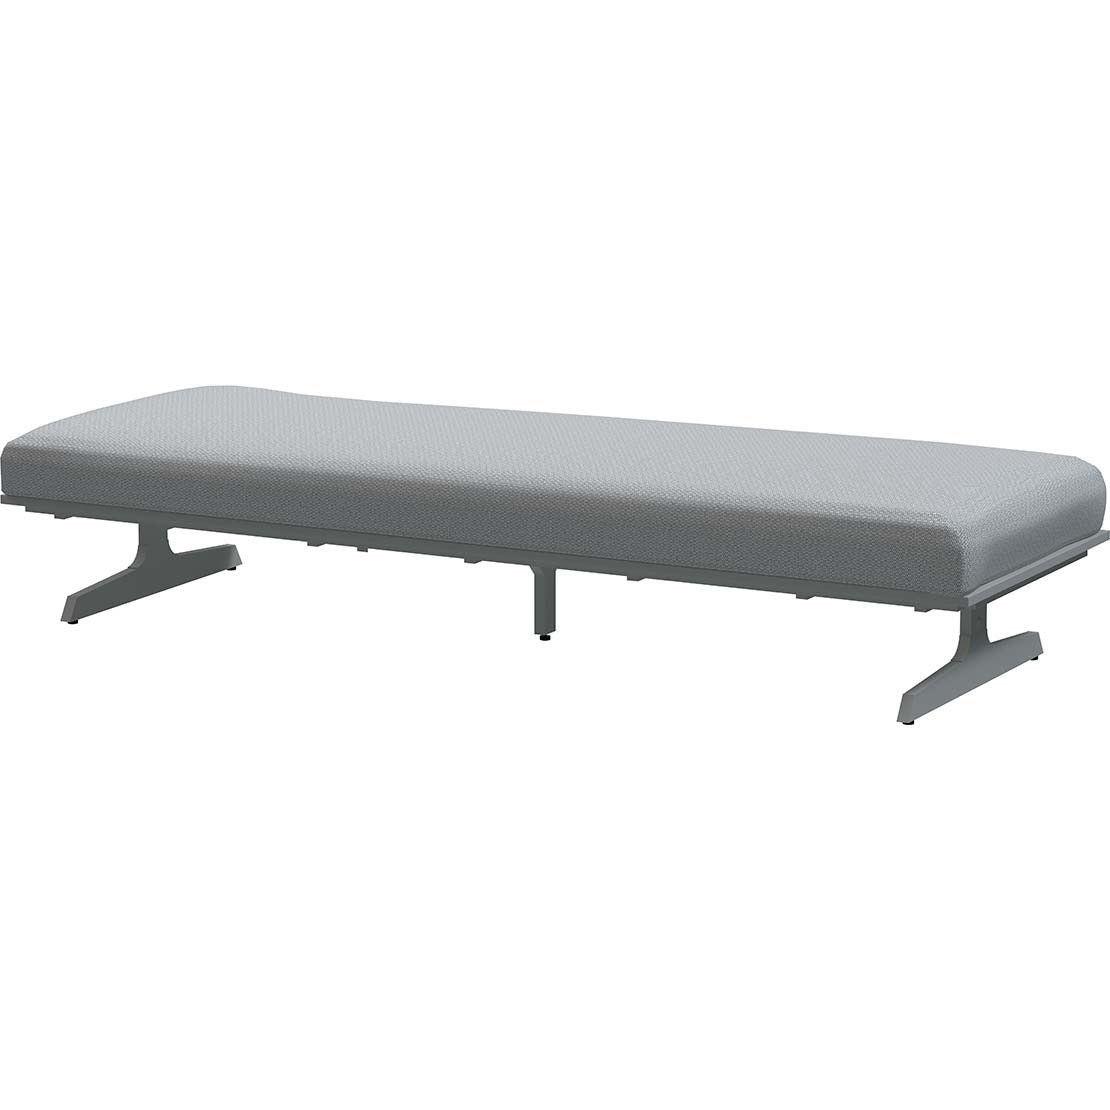 Play panel concept Frost Grey 3 seater base with cushion